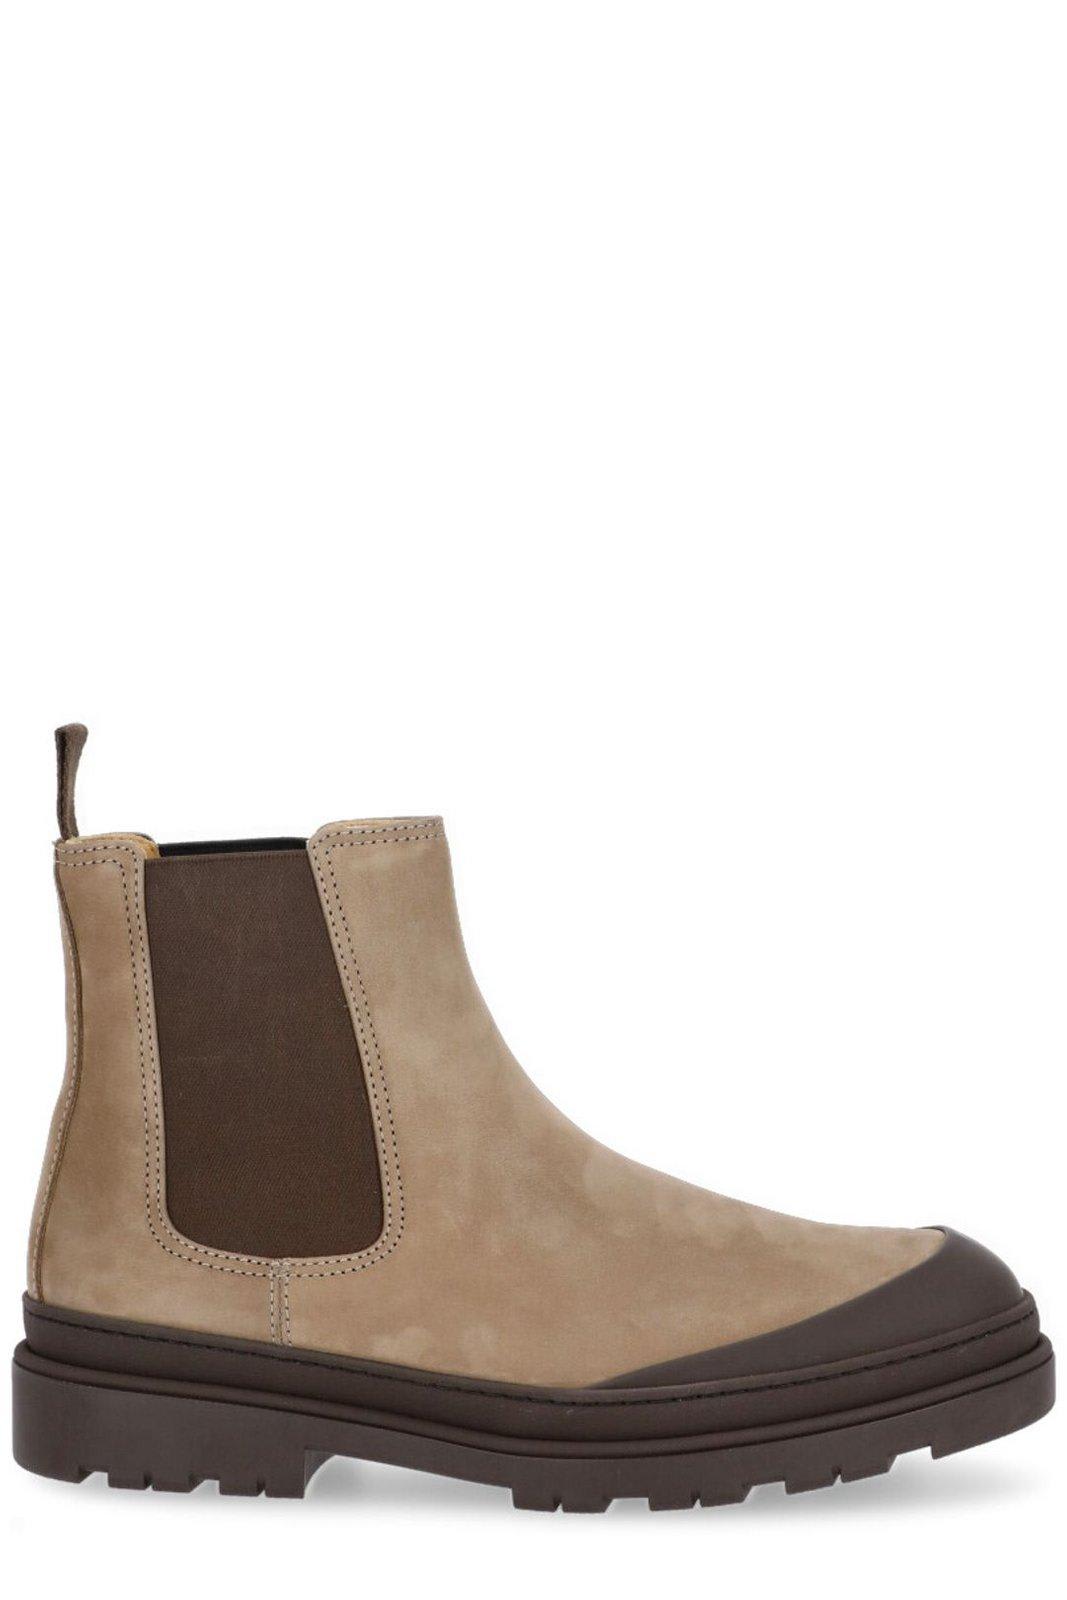 Brunello Cucinelli Round Toe Ankle Chelsea Boots